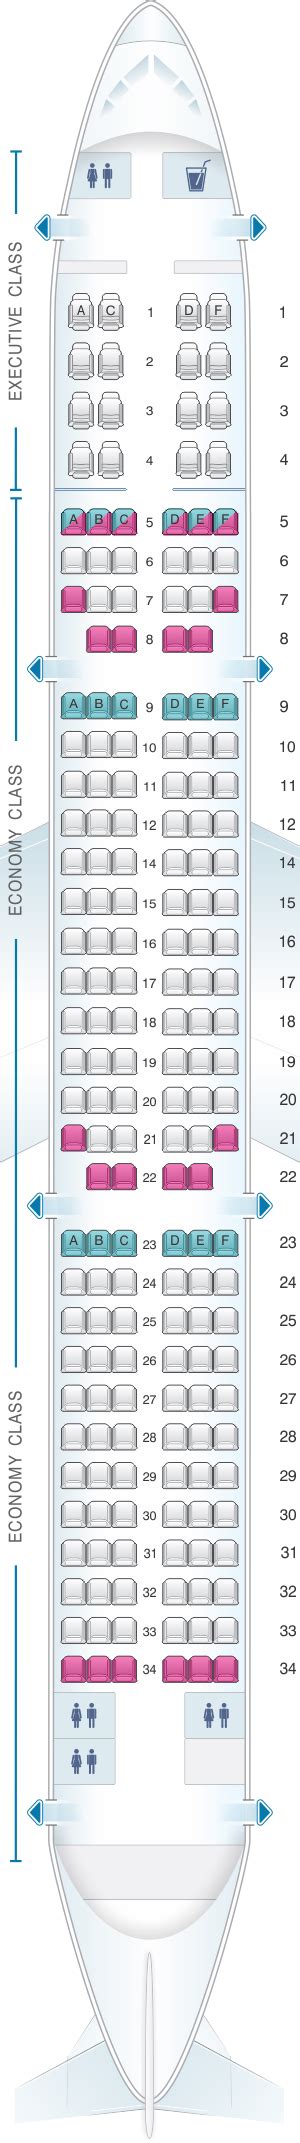 azores airlines a321 seat map